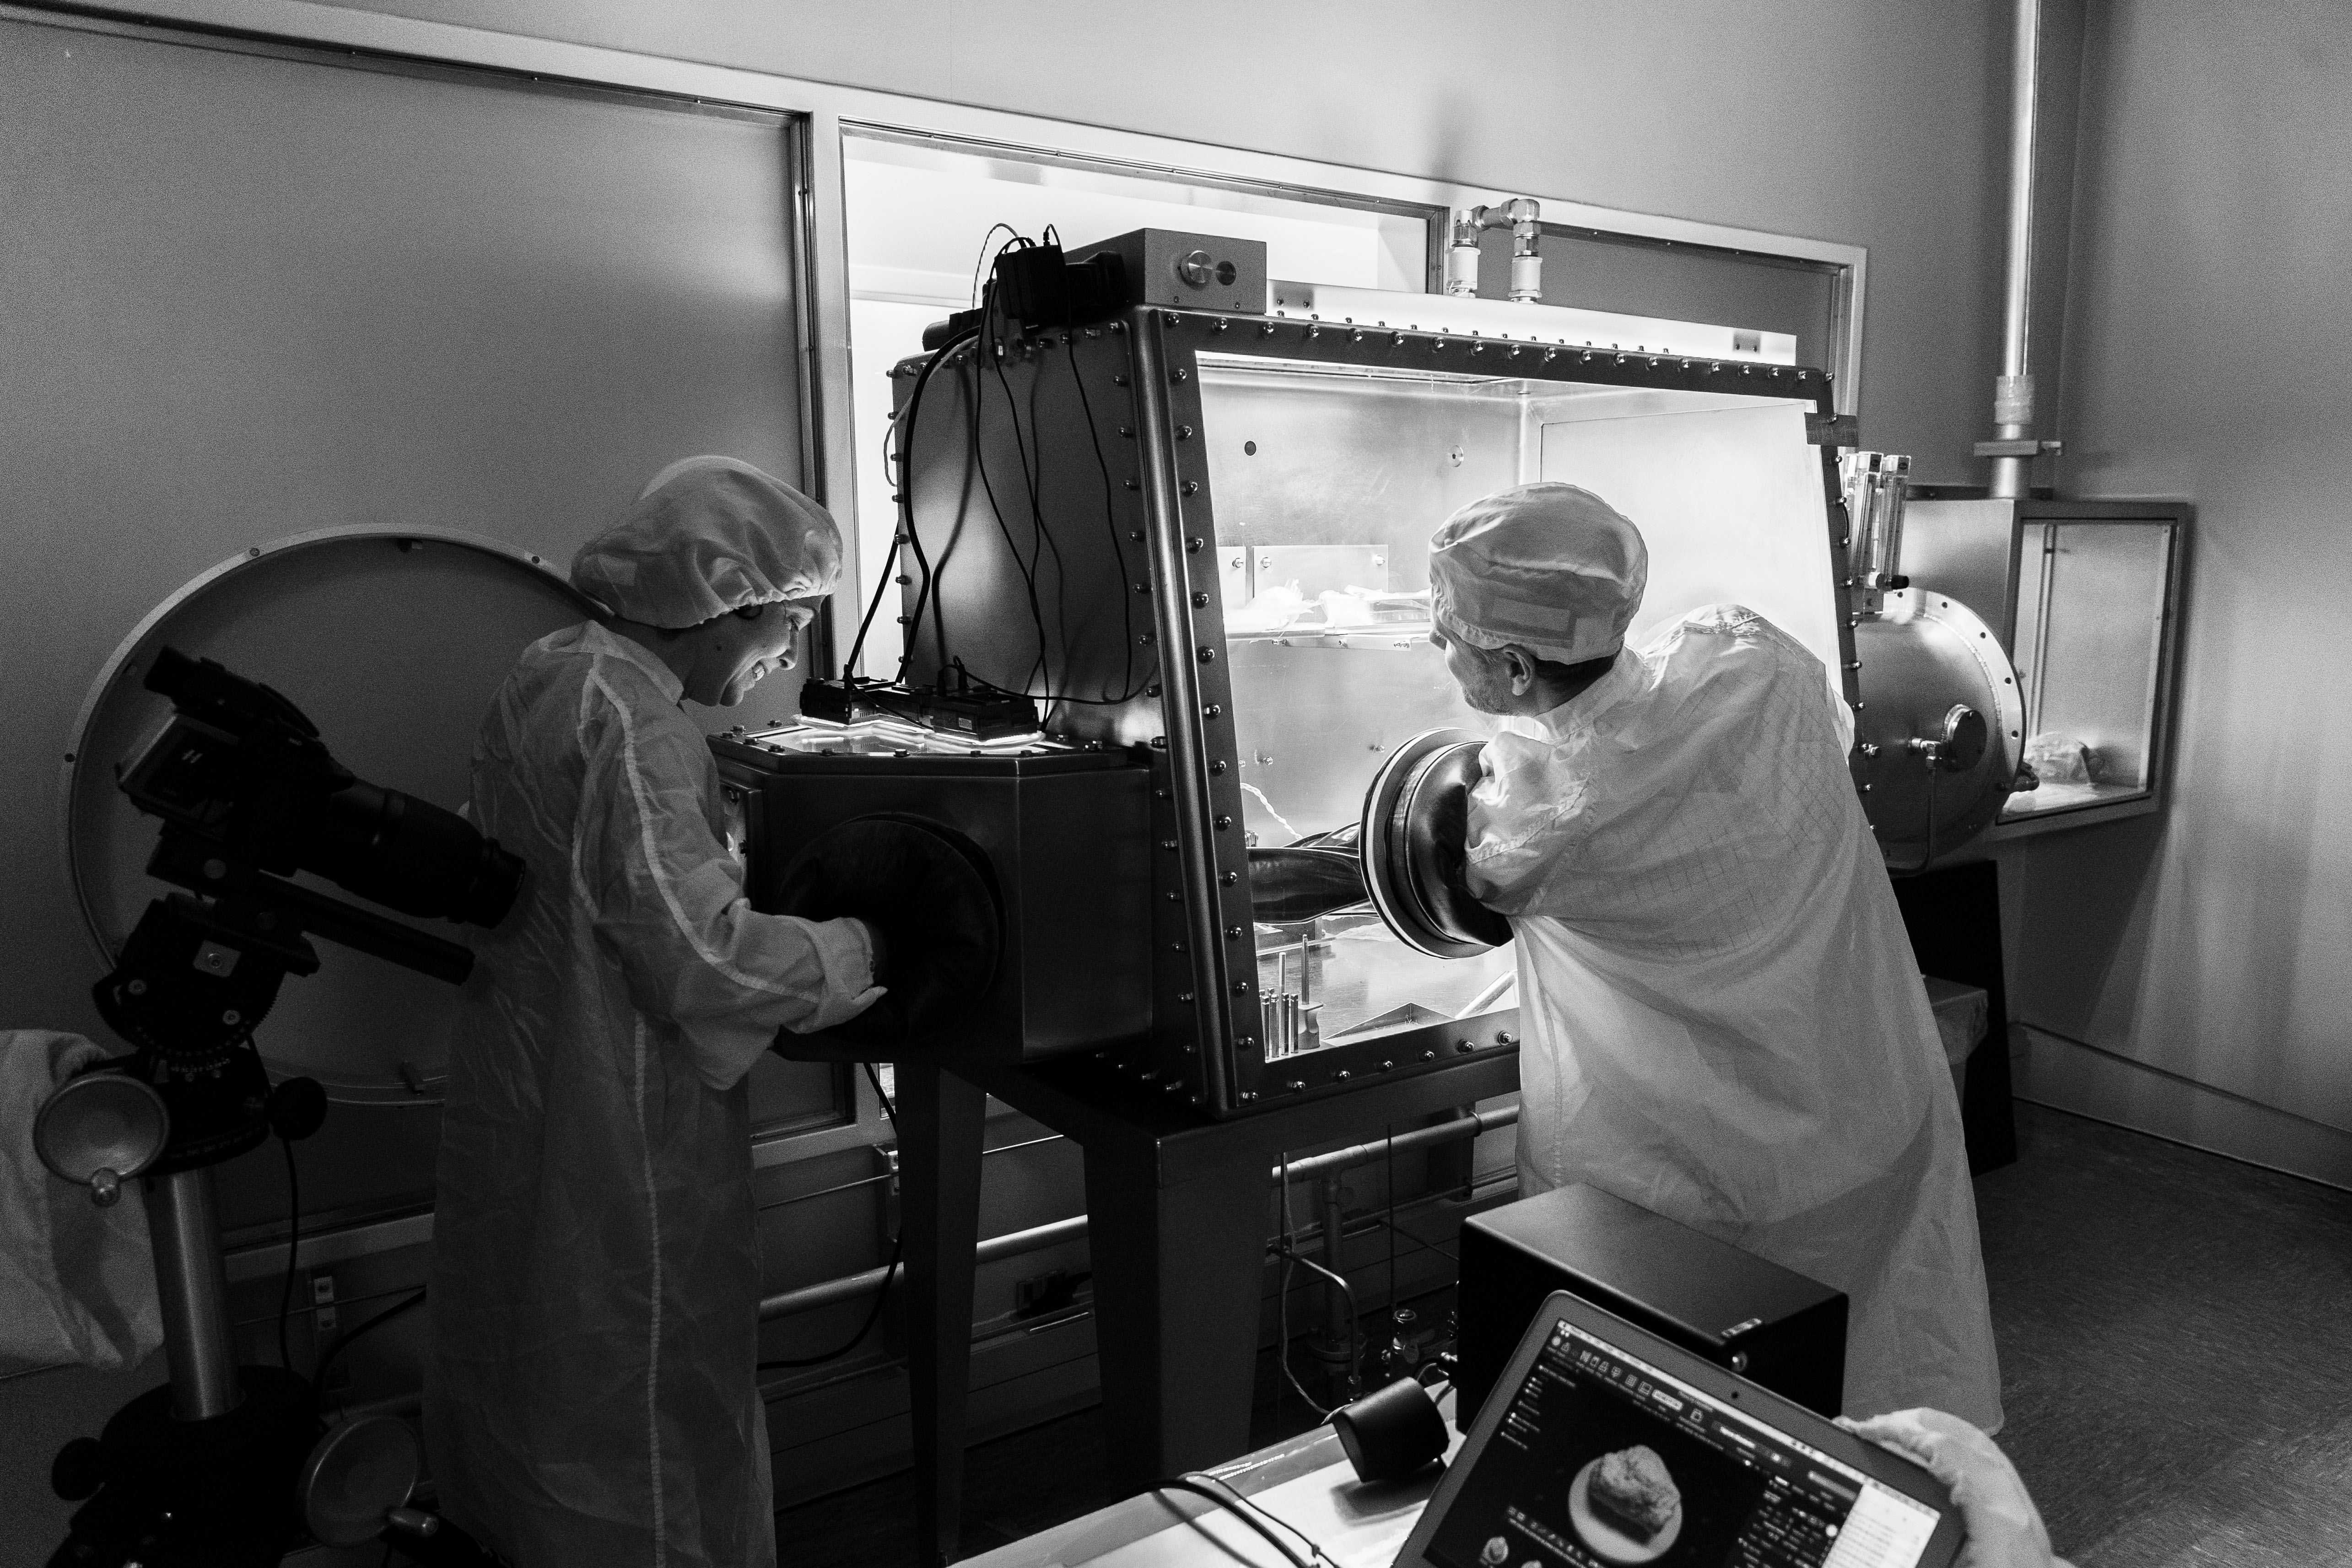 Erika Blumenfeld and Jeremy Kent photographing samples in the Lunar Lab.